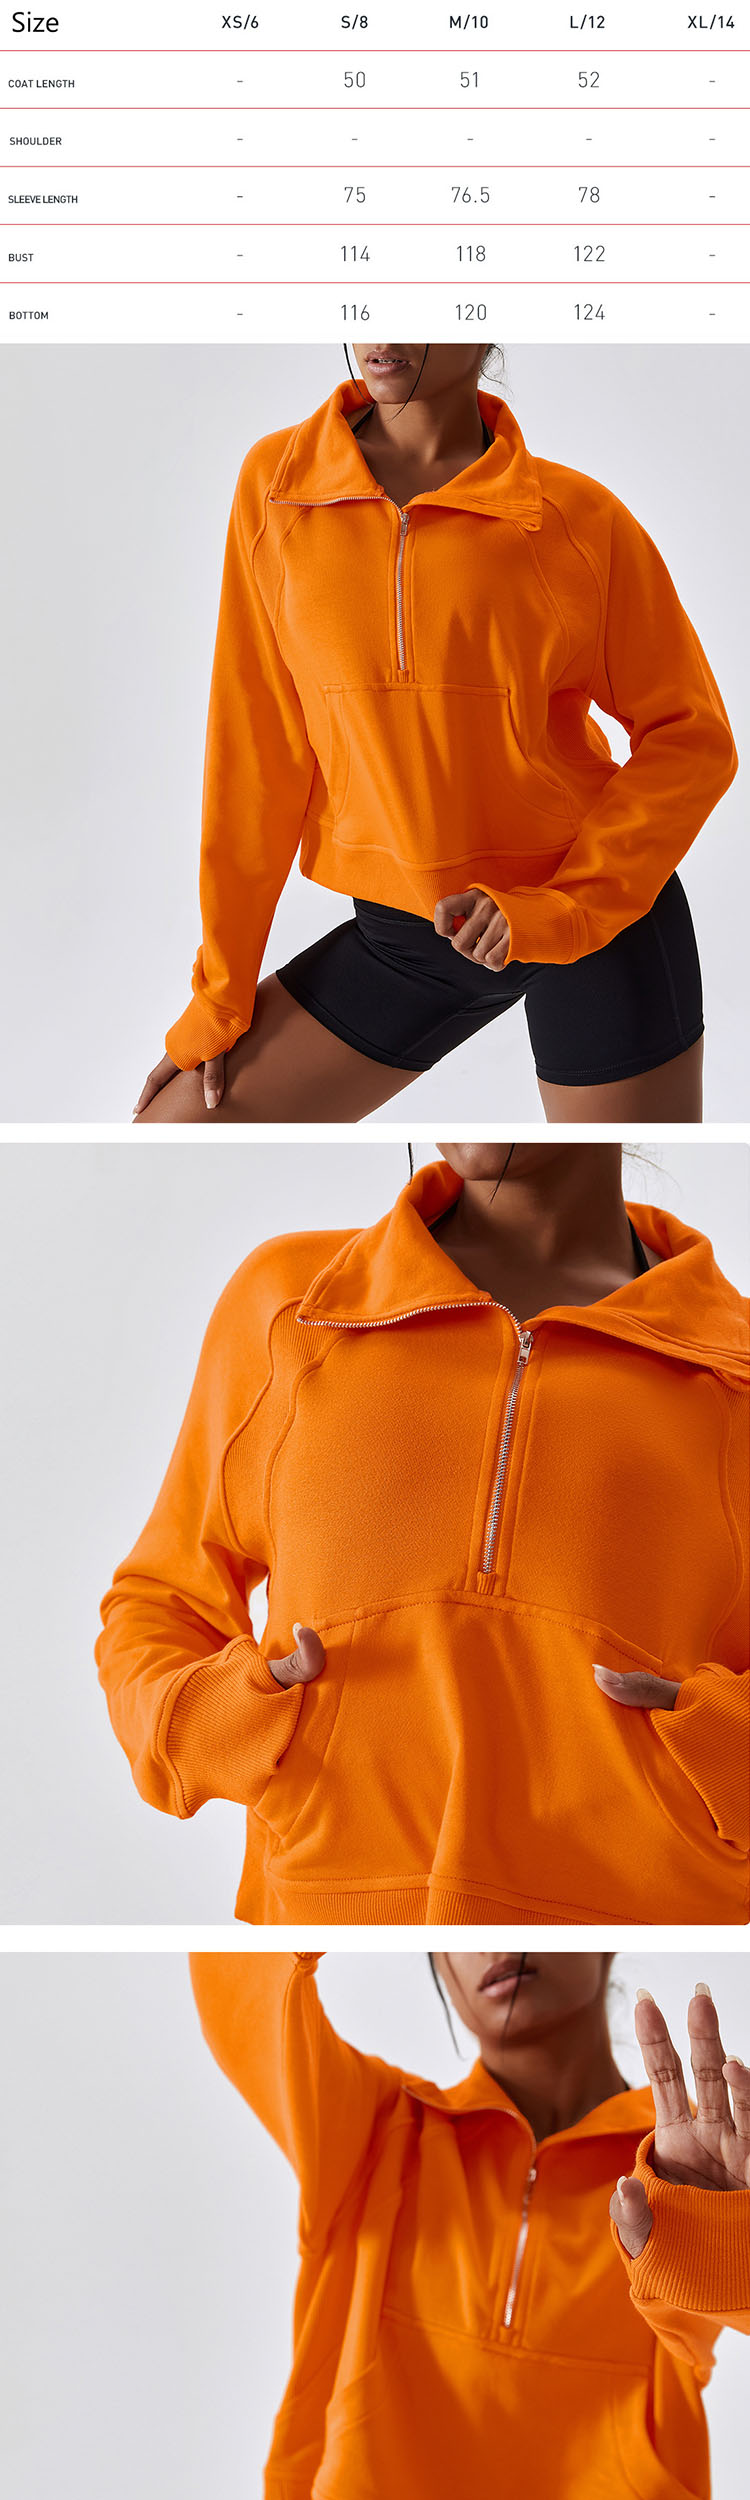 Womens orange athletic jacket is very windproof and warm